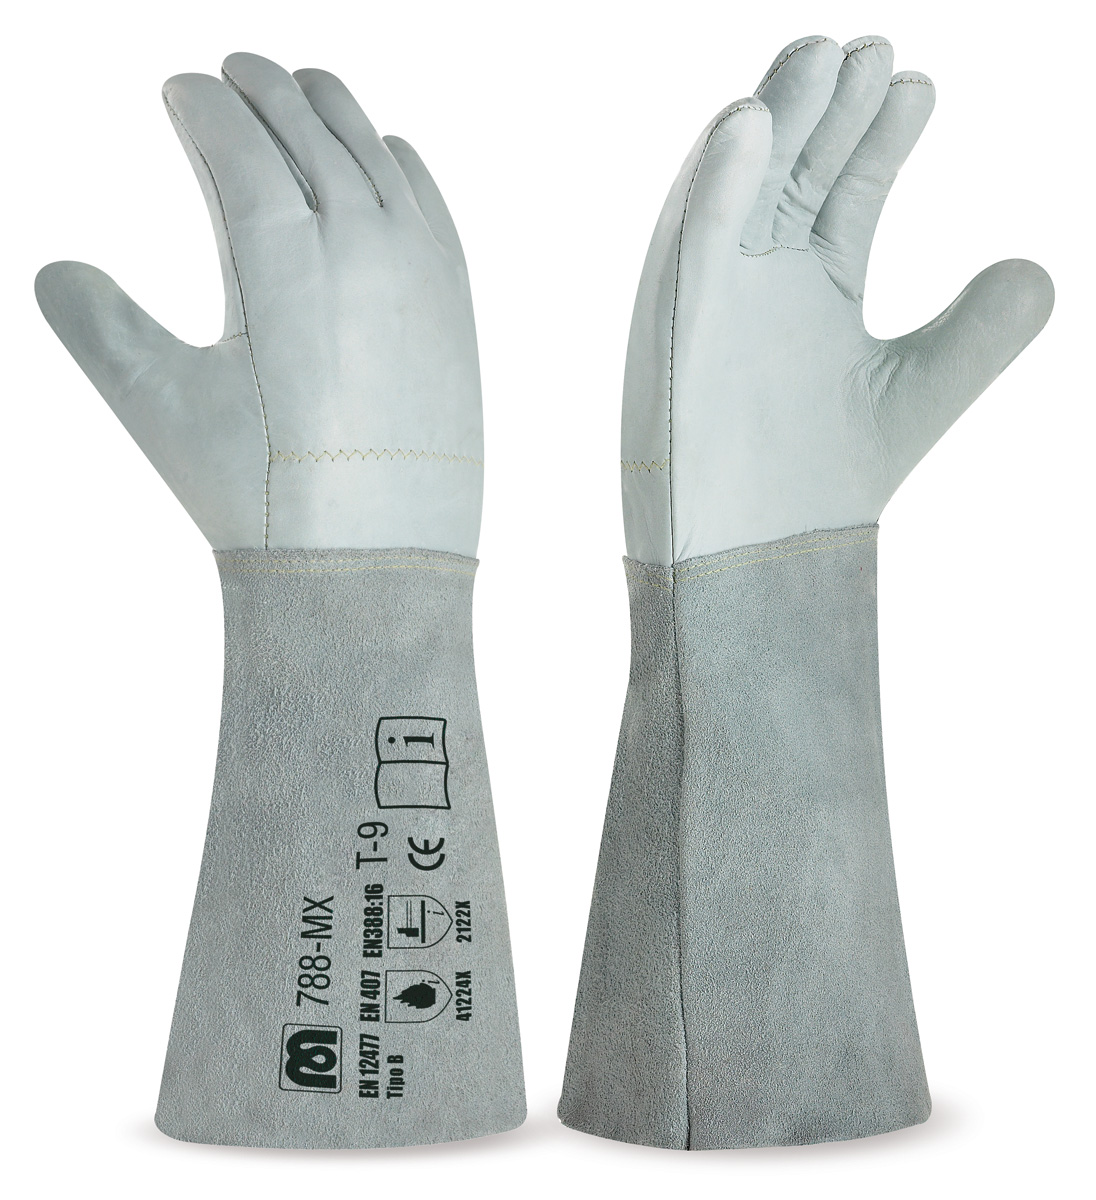 788-MX Work Gloves Welding Grain leather palm and split leather sleeve with Kevlar seams.